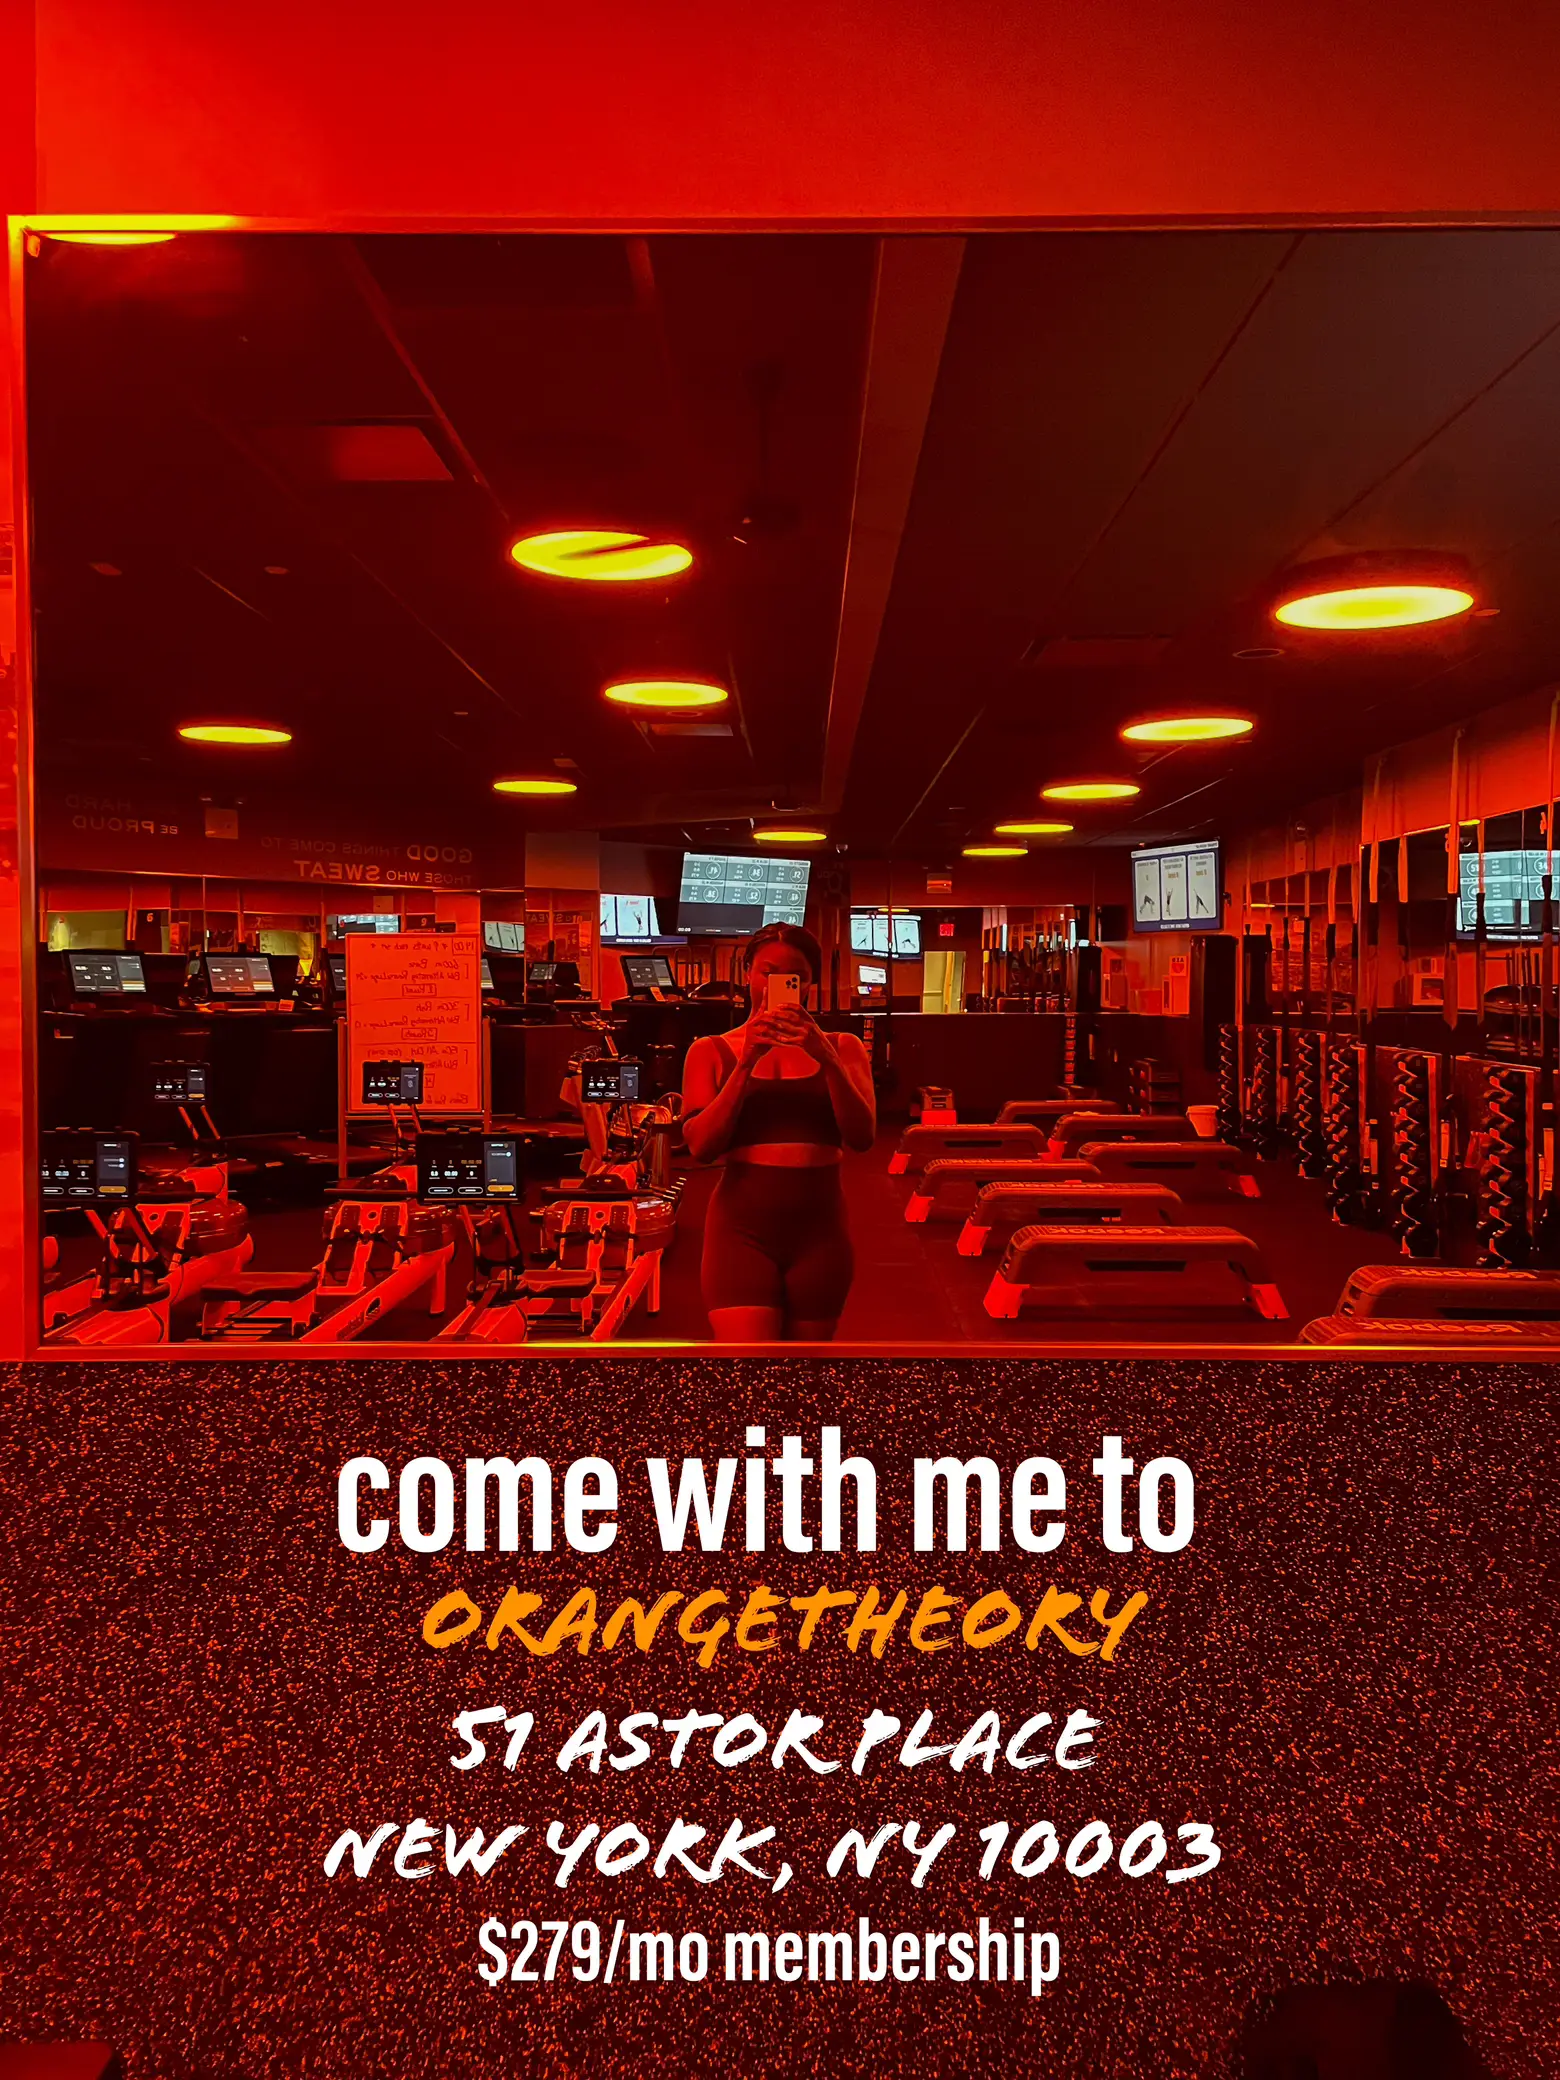 Come with me to Orangetheory!  Gallery posted by Kingkrystine